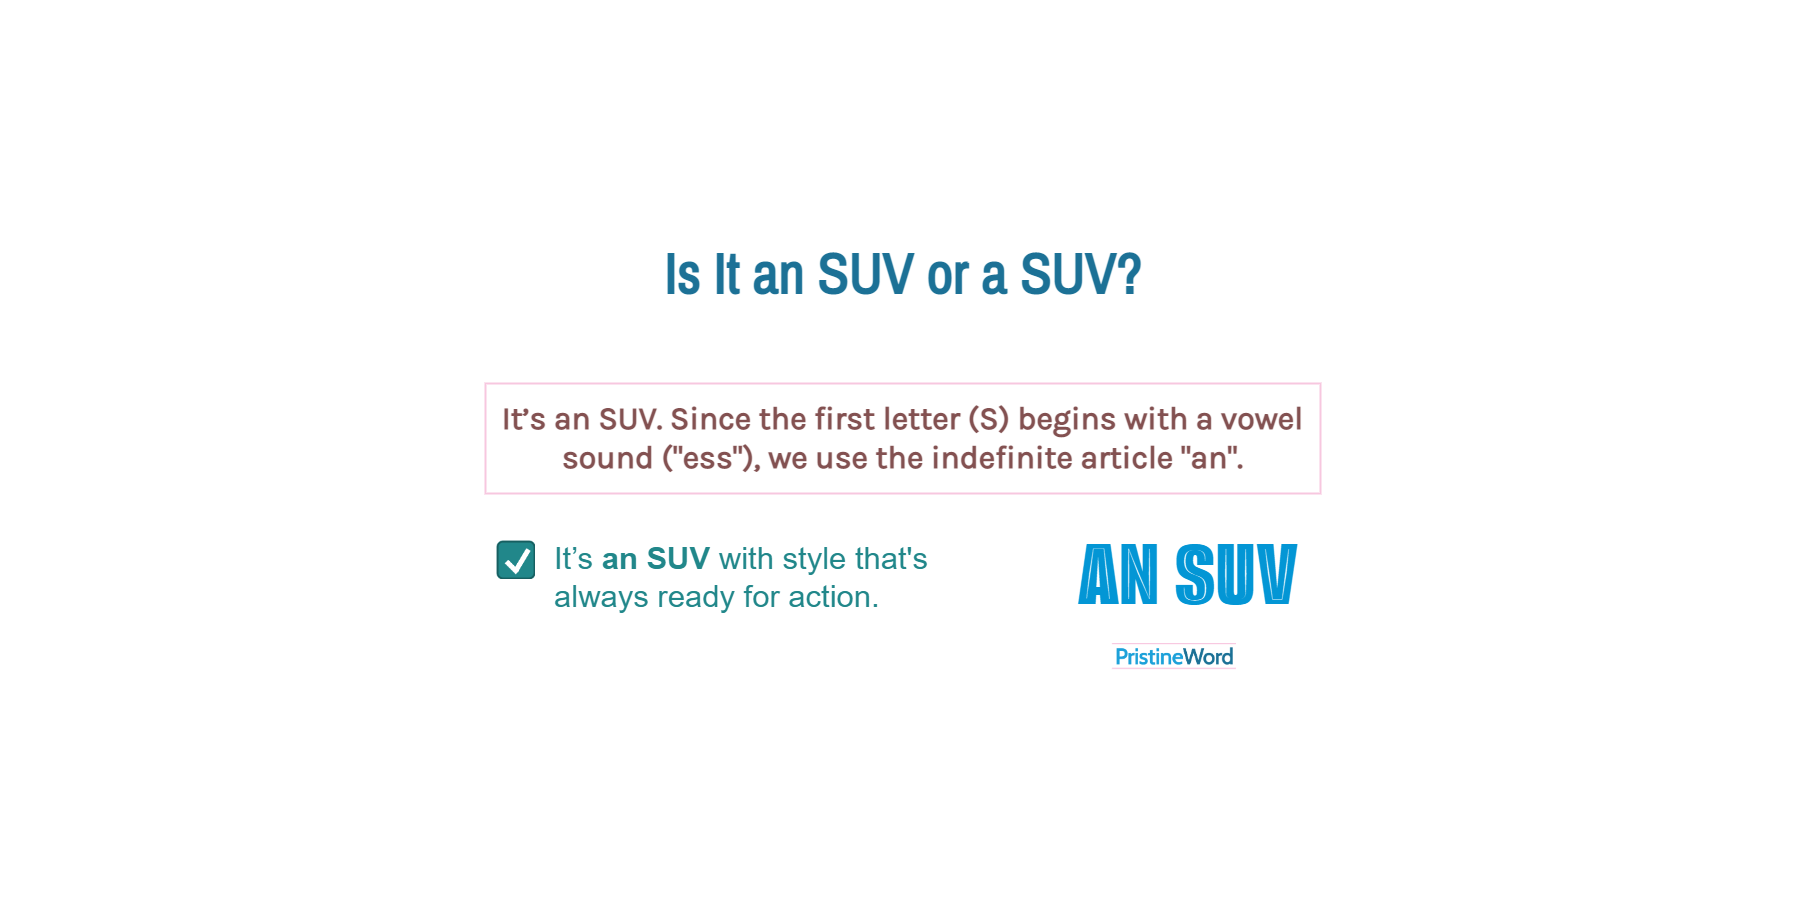 Is It an SUV or a SUV?